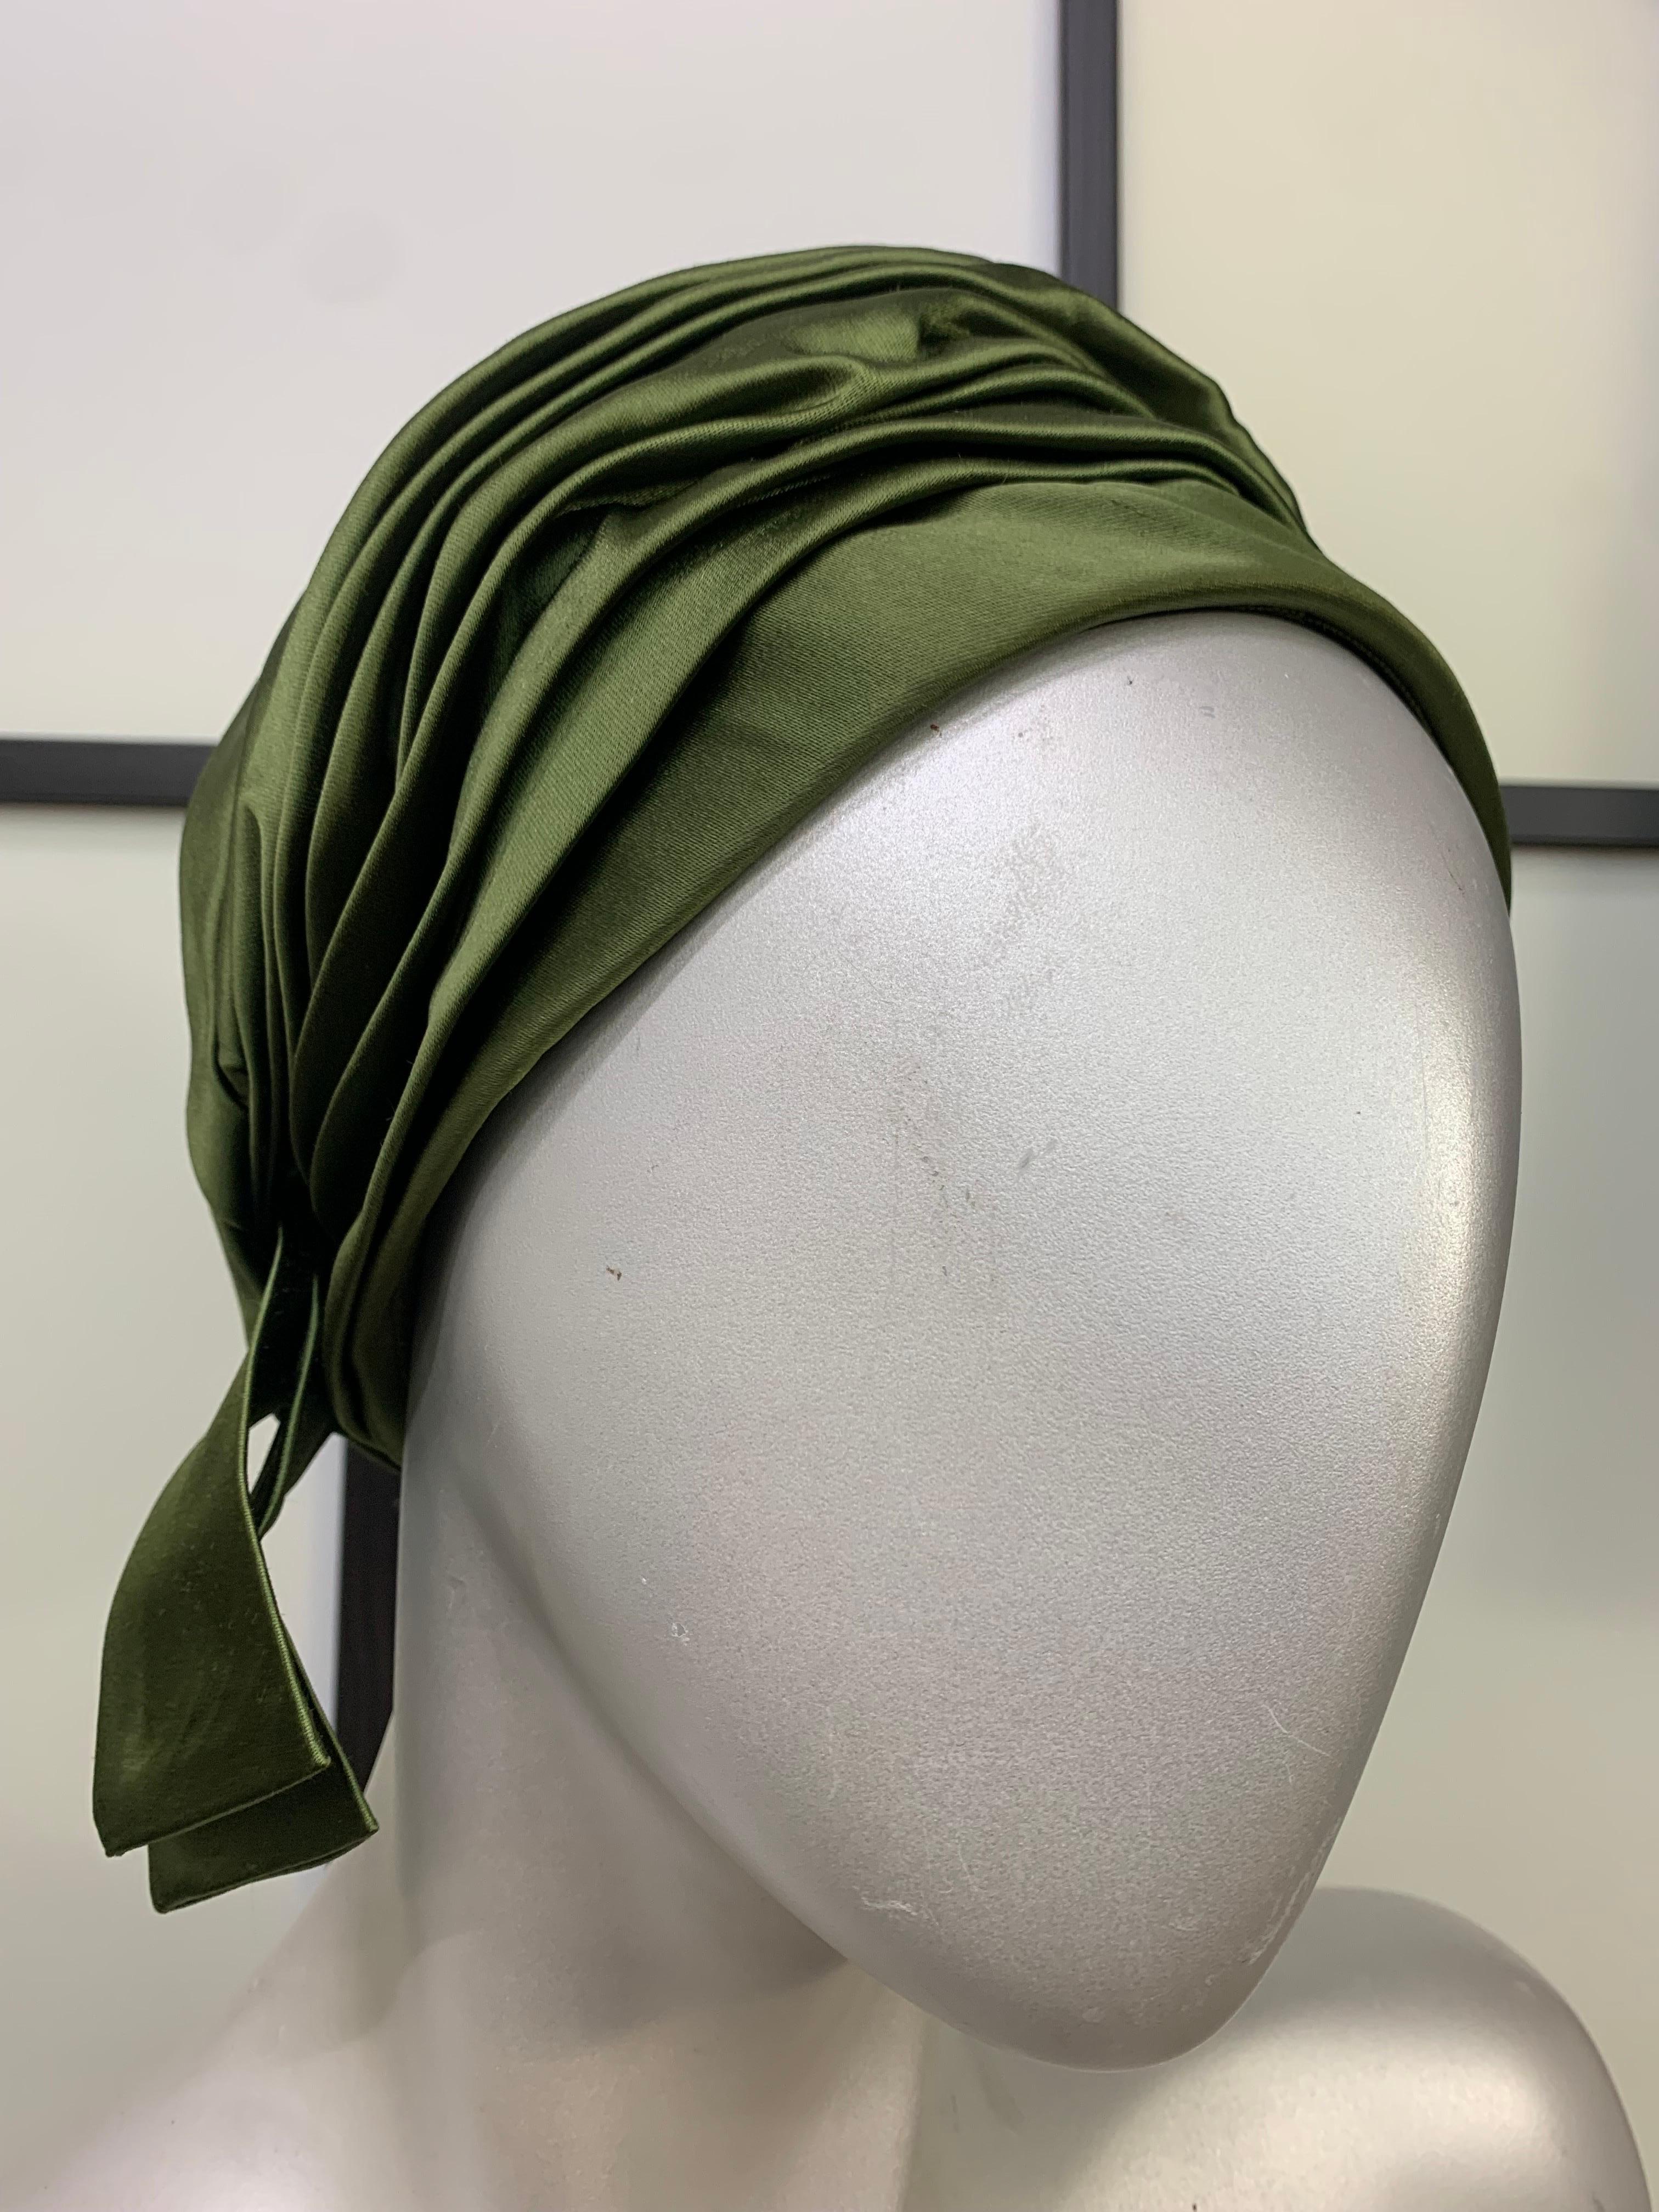 A fabulously louche 1960s Christian Dior by Marc Bohan, sage green silk satin turban hat:  Pleated sage green satin turban hat is styled to one side for personality!   Worn with a tailored look, this is especially chic. Size 22.